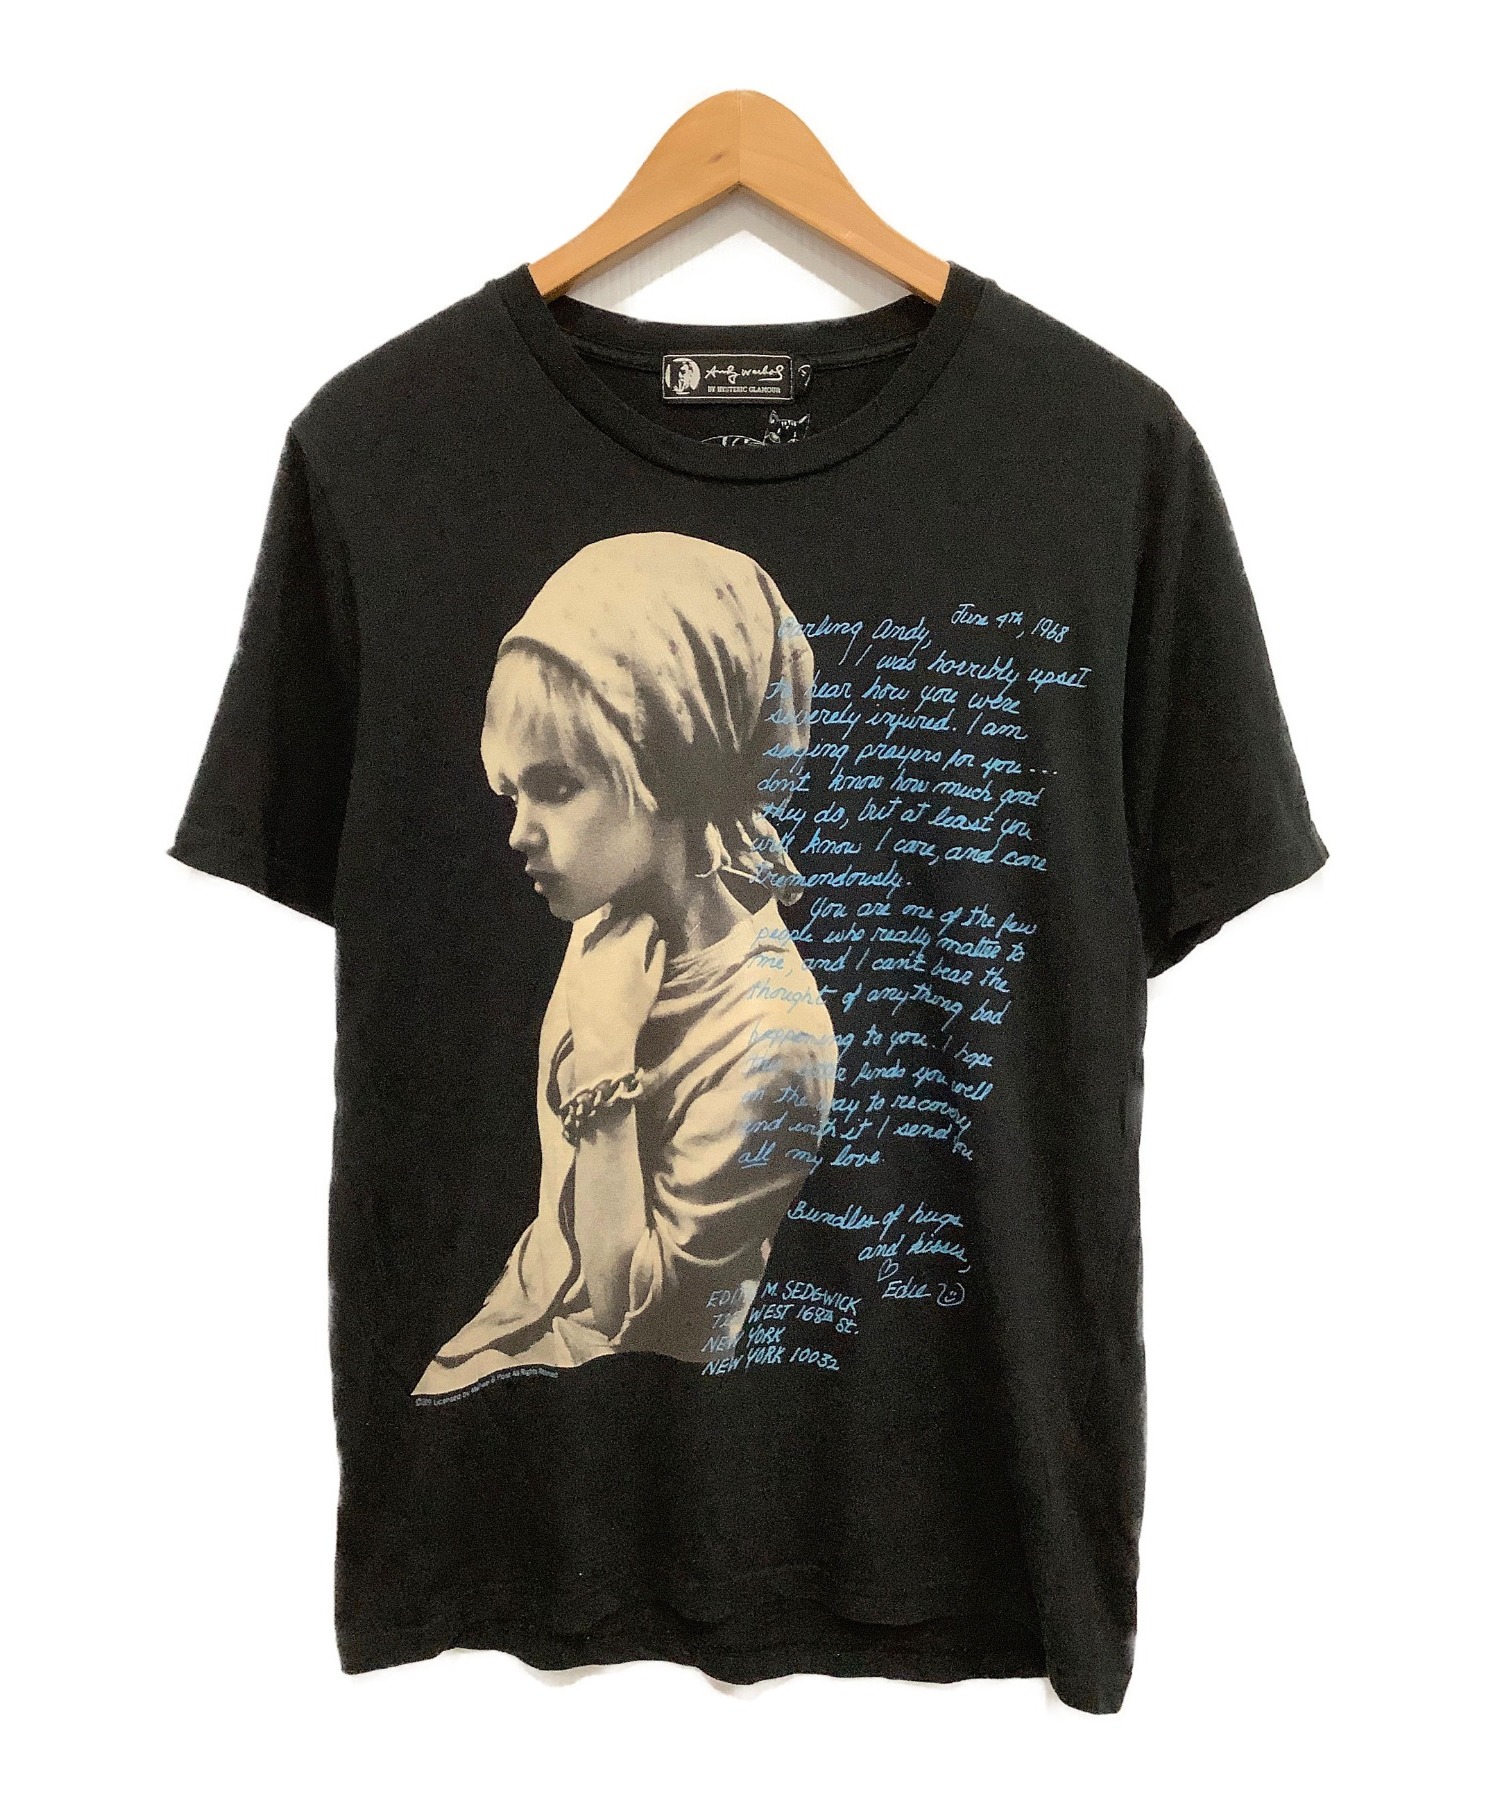 ANDY WARHOL by HYSTERIC GLAMOUR Tシャツ rsiZc3ZZfE - iuu.org.tr